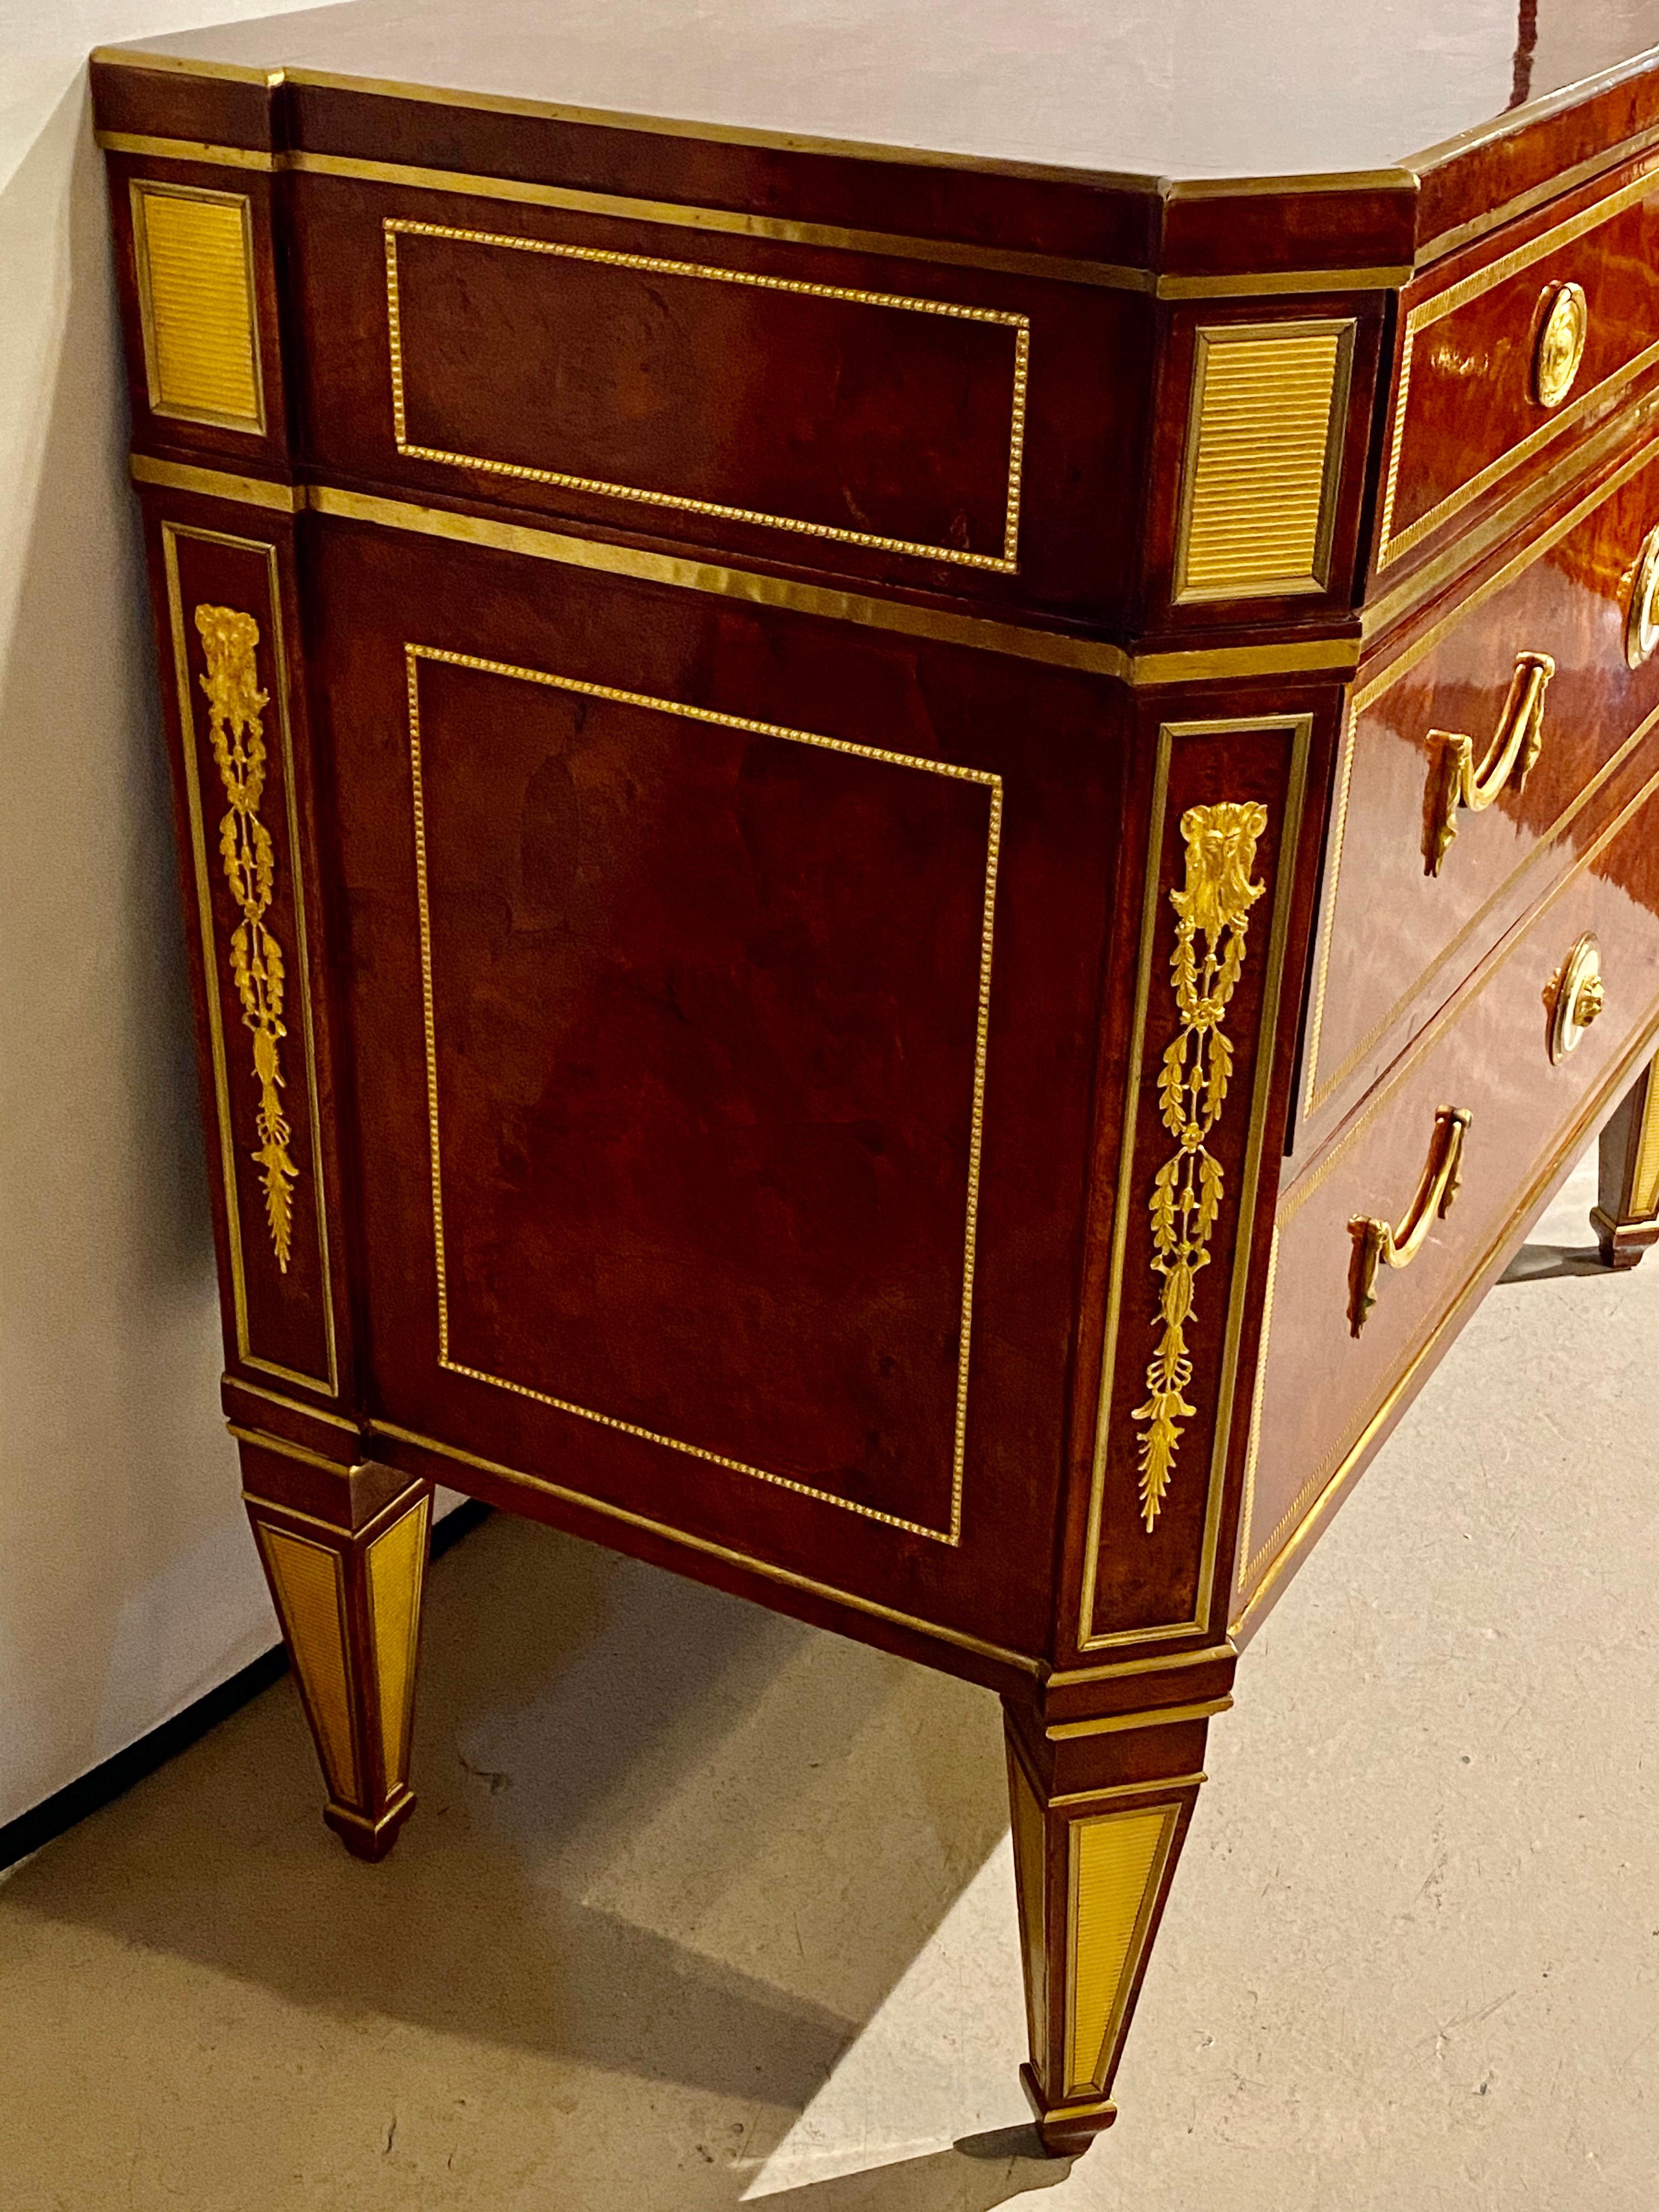 Neoclassical, Rare Commodes, Tortoise Shell Veneer, Bronze, Baltic States, 1880s For Sale 14